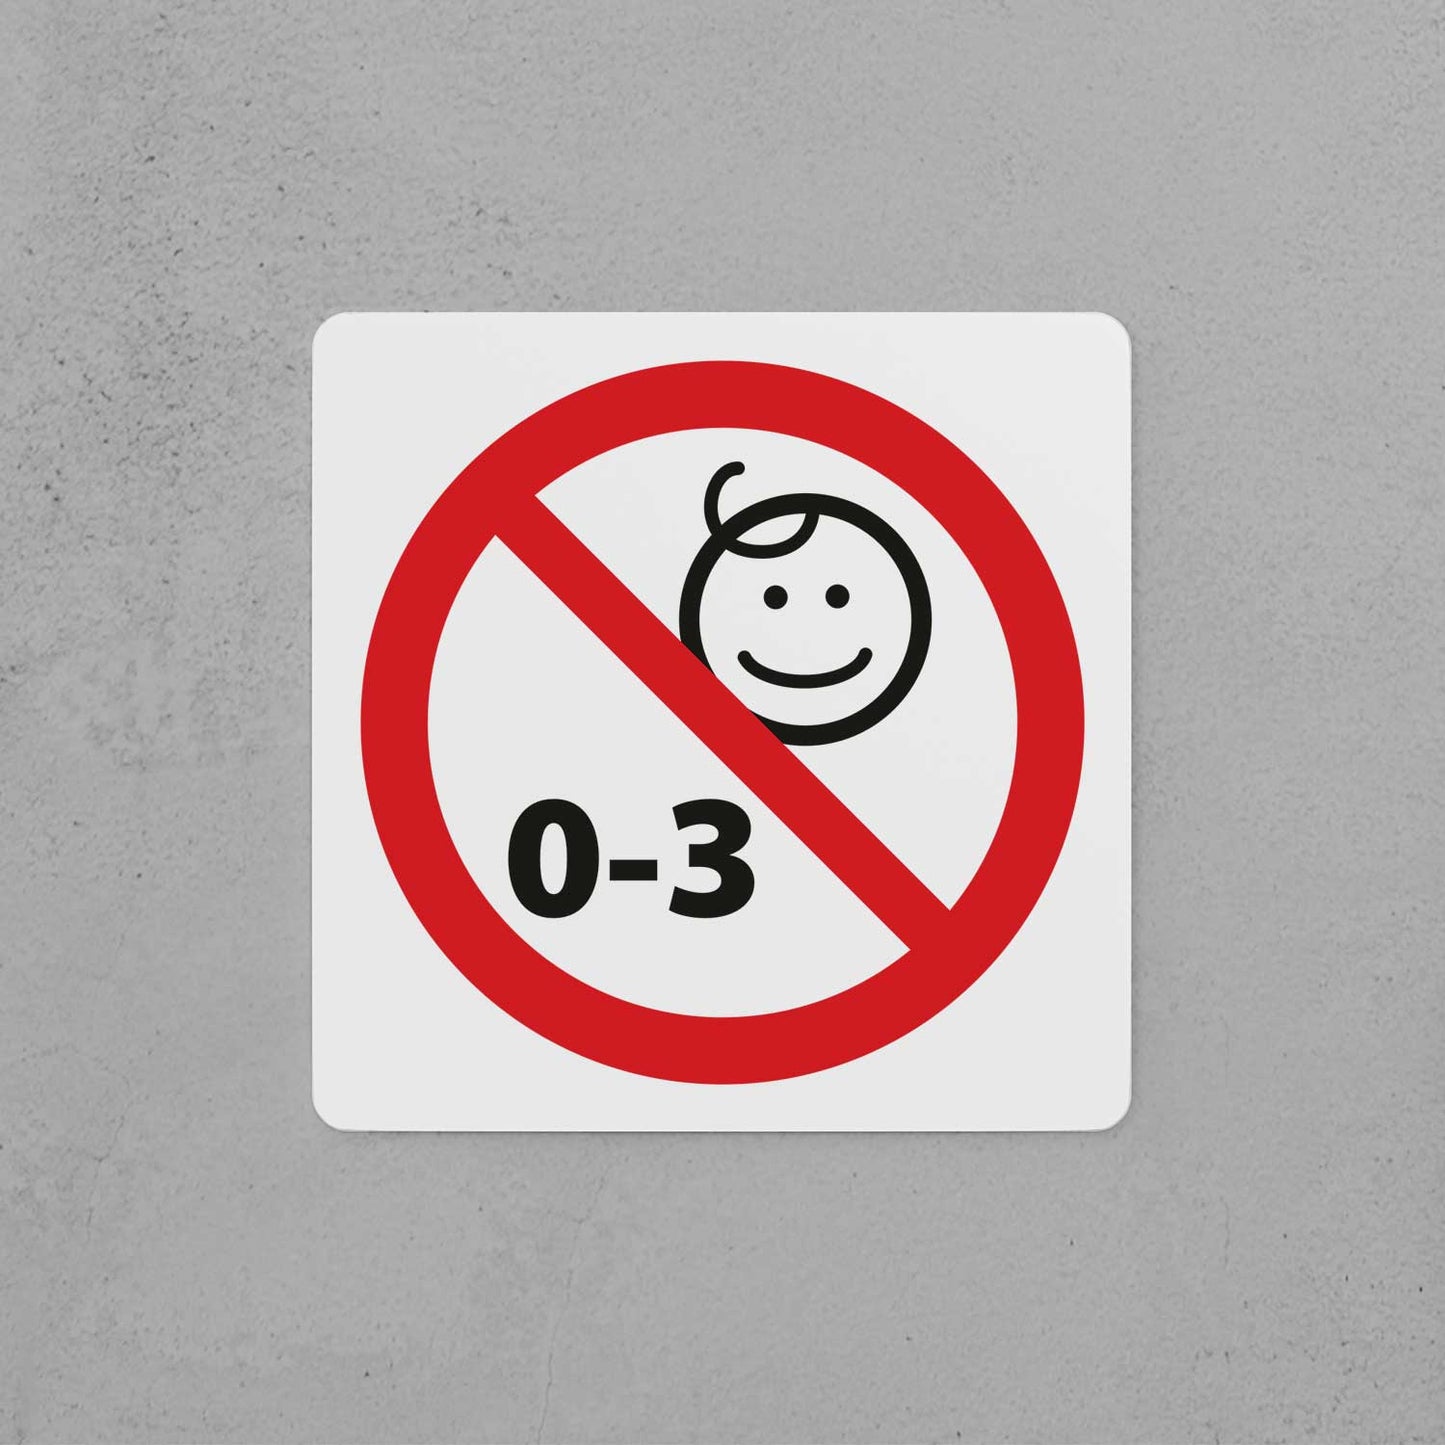 No Babies Allowed Sign